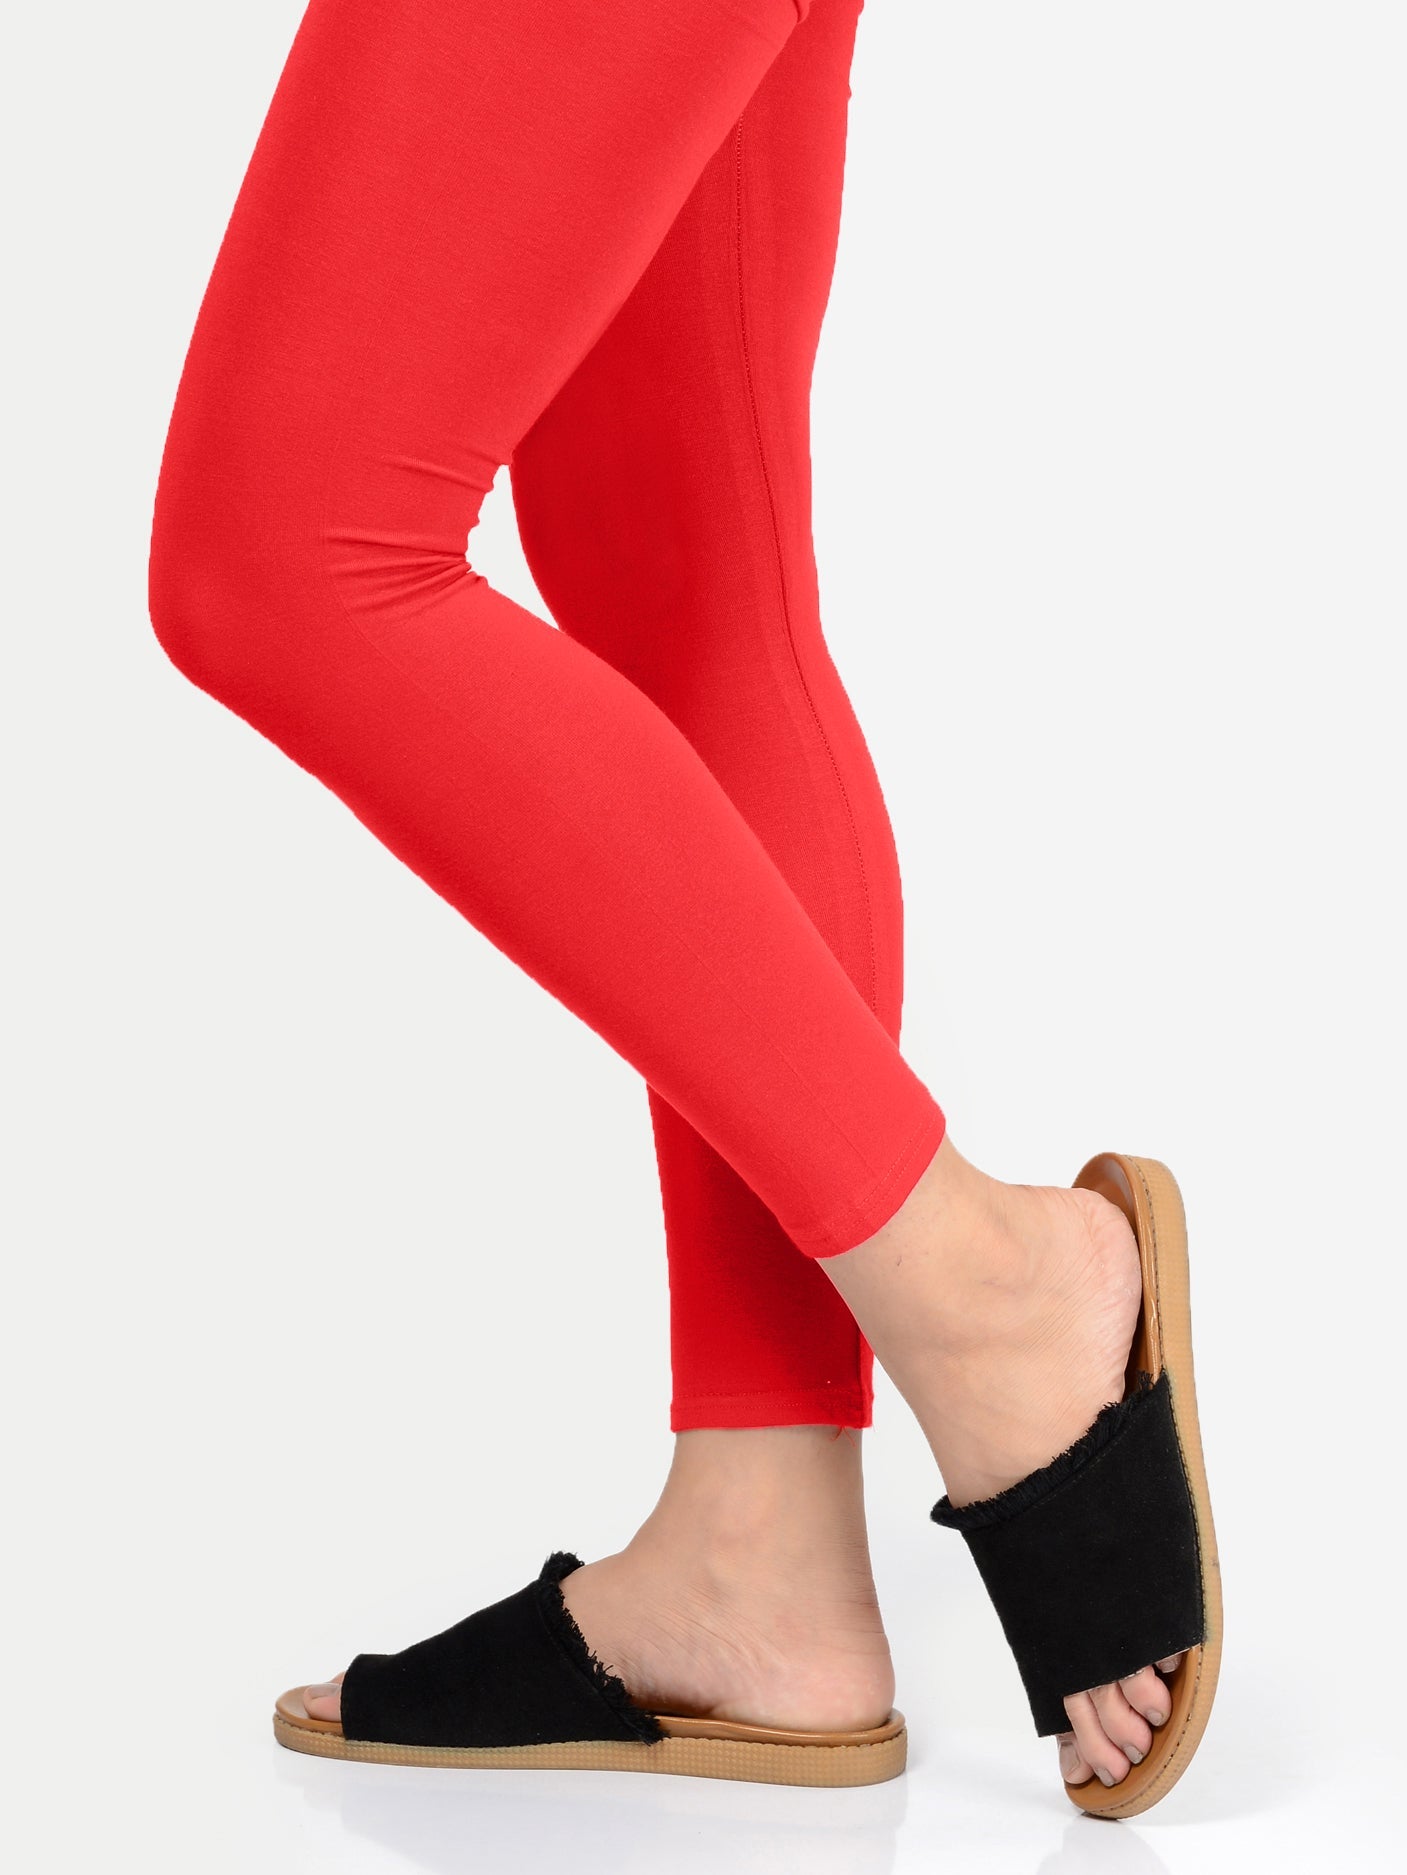 Stretchy Cotton Plain Tights